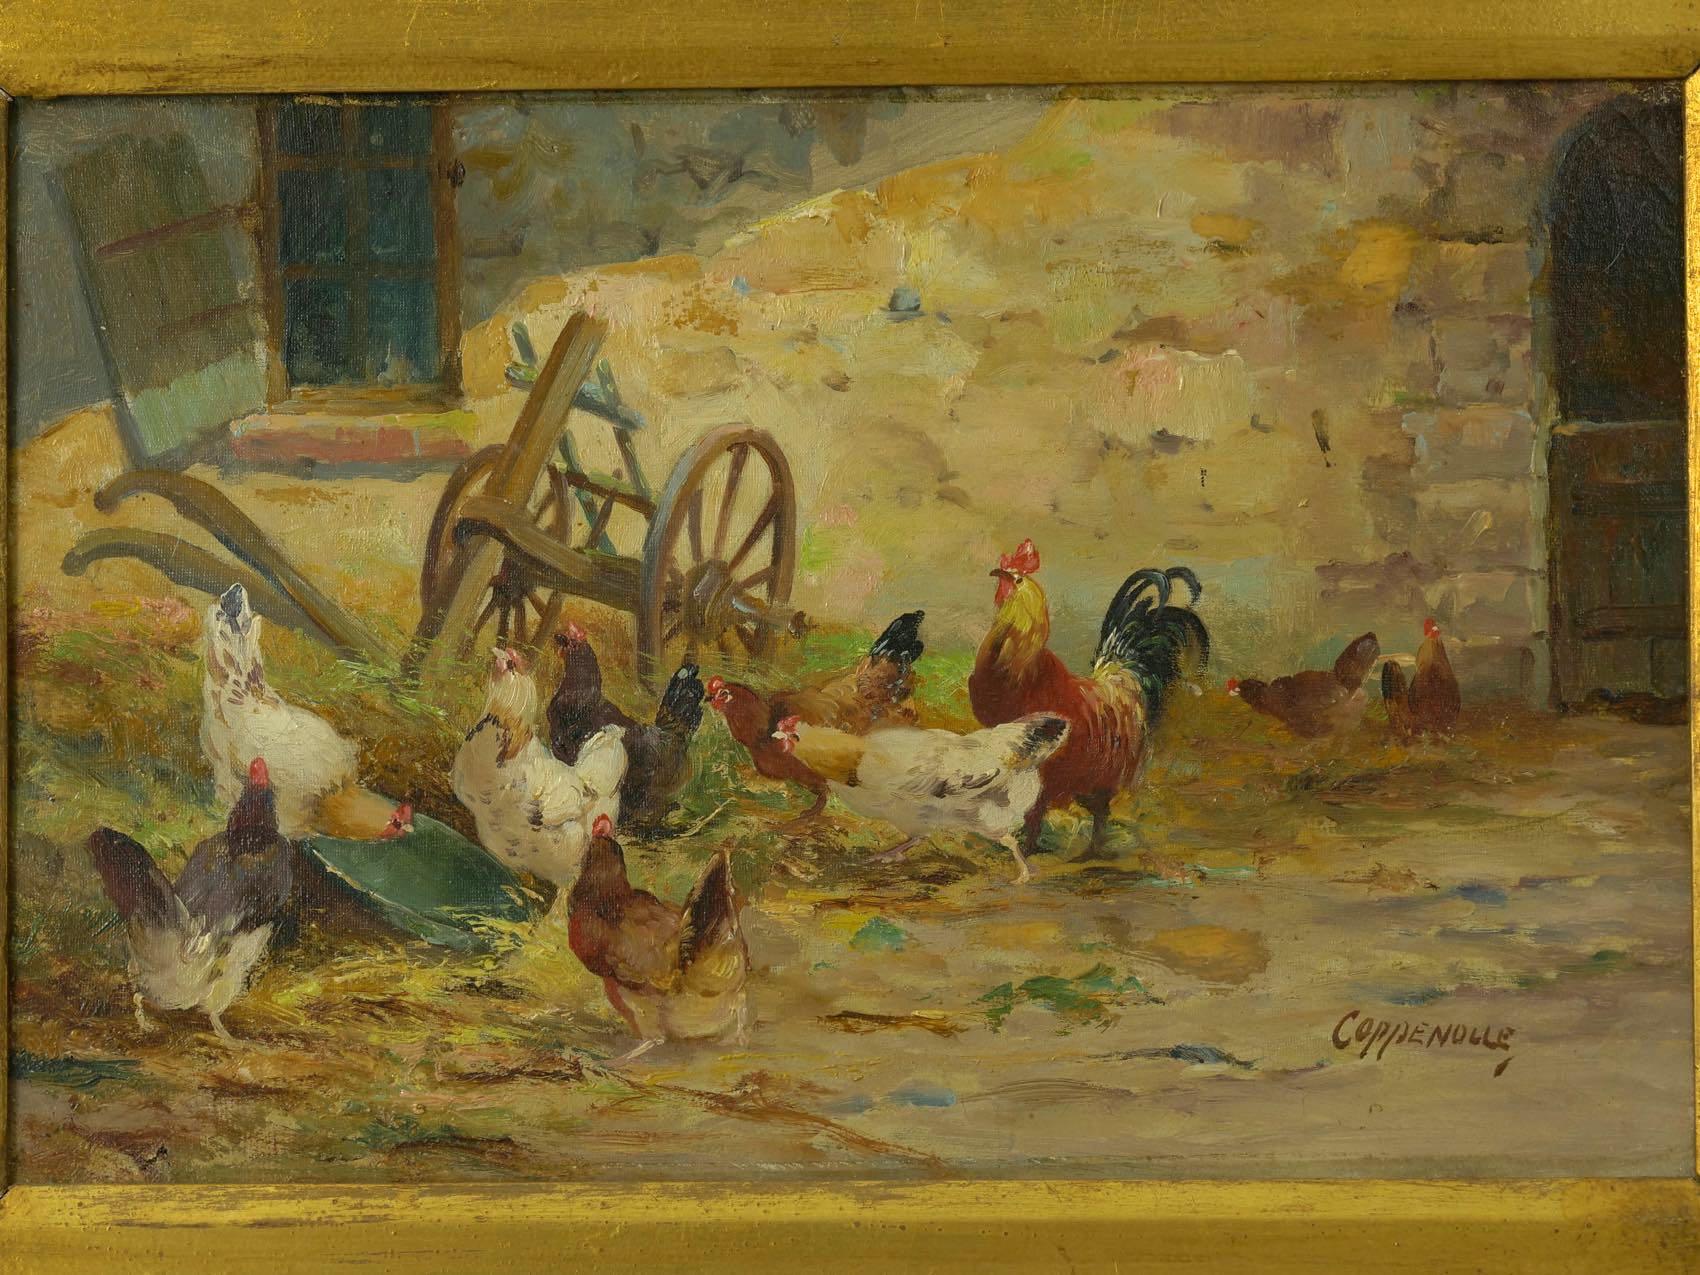 A bright and vivid farmyard scene by Jacques van Coppenolle, it is a good example of his barnyard oeuvre with early traces of French impressionism in his handling of the scene coupled with a bold and cheery palette. A group of hens are gathered